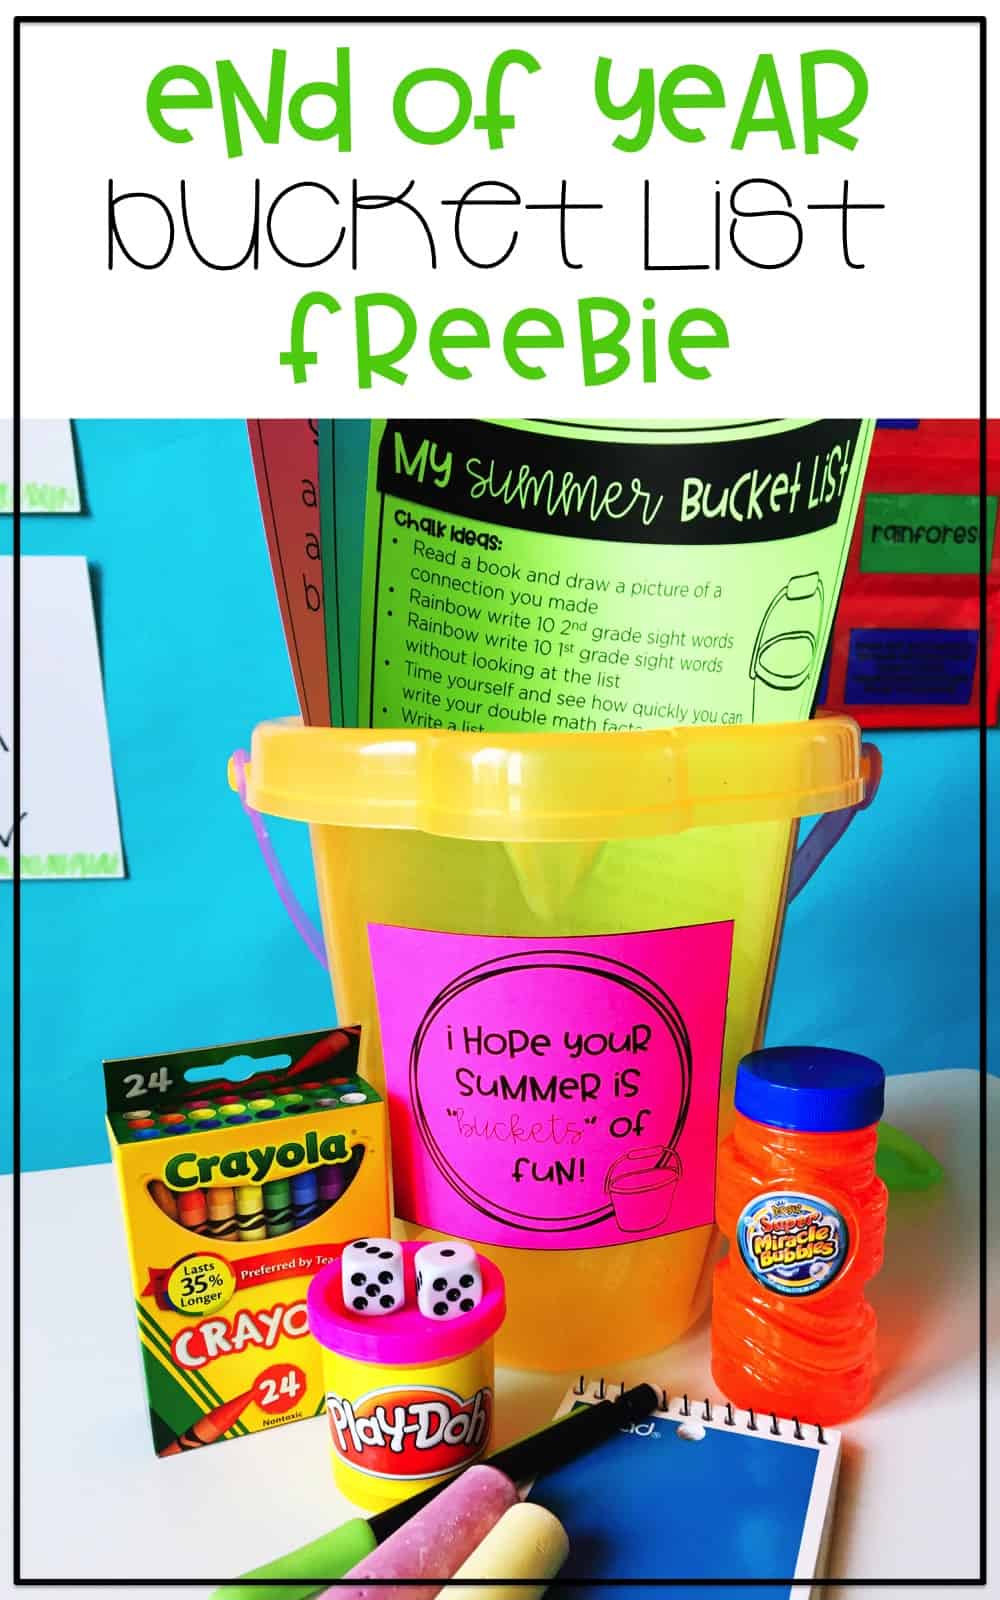 Partnering with parents is important as teachers! This end of year bucket list FREEBIE is great to help parents support what happened in the classroom throughout the summer!